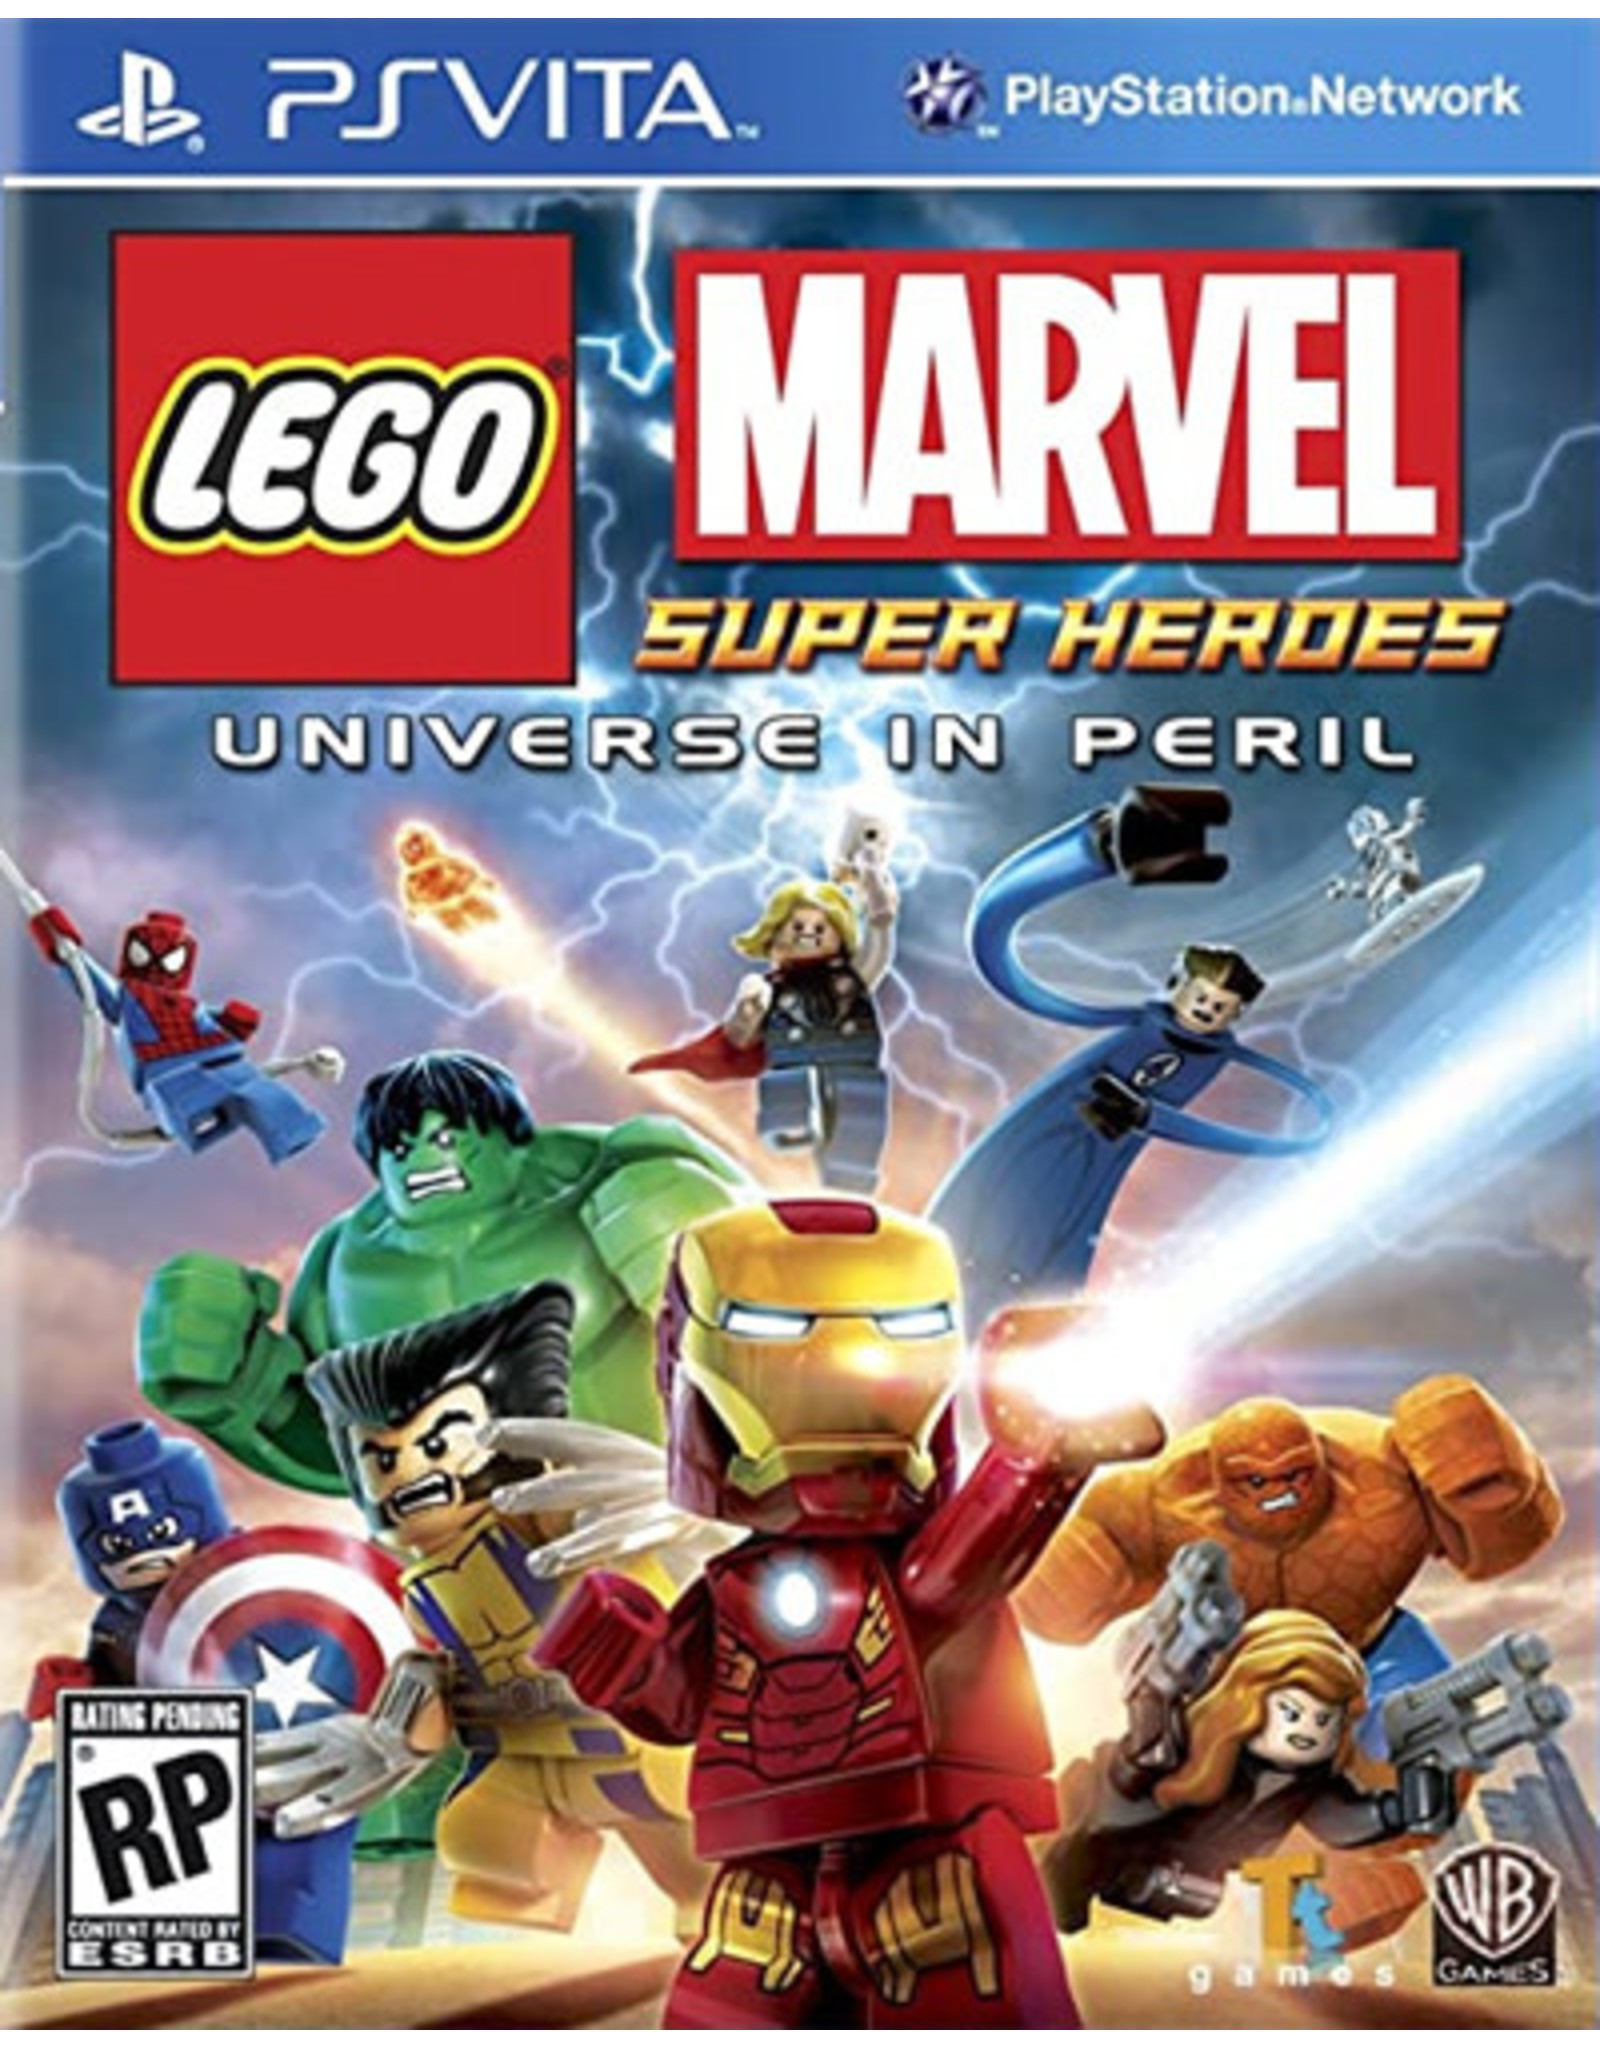 Playstation Vita Lego Marvel Super Heroes: Universe in Peril (Brand New)